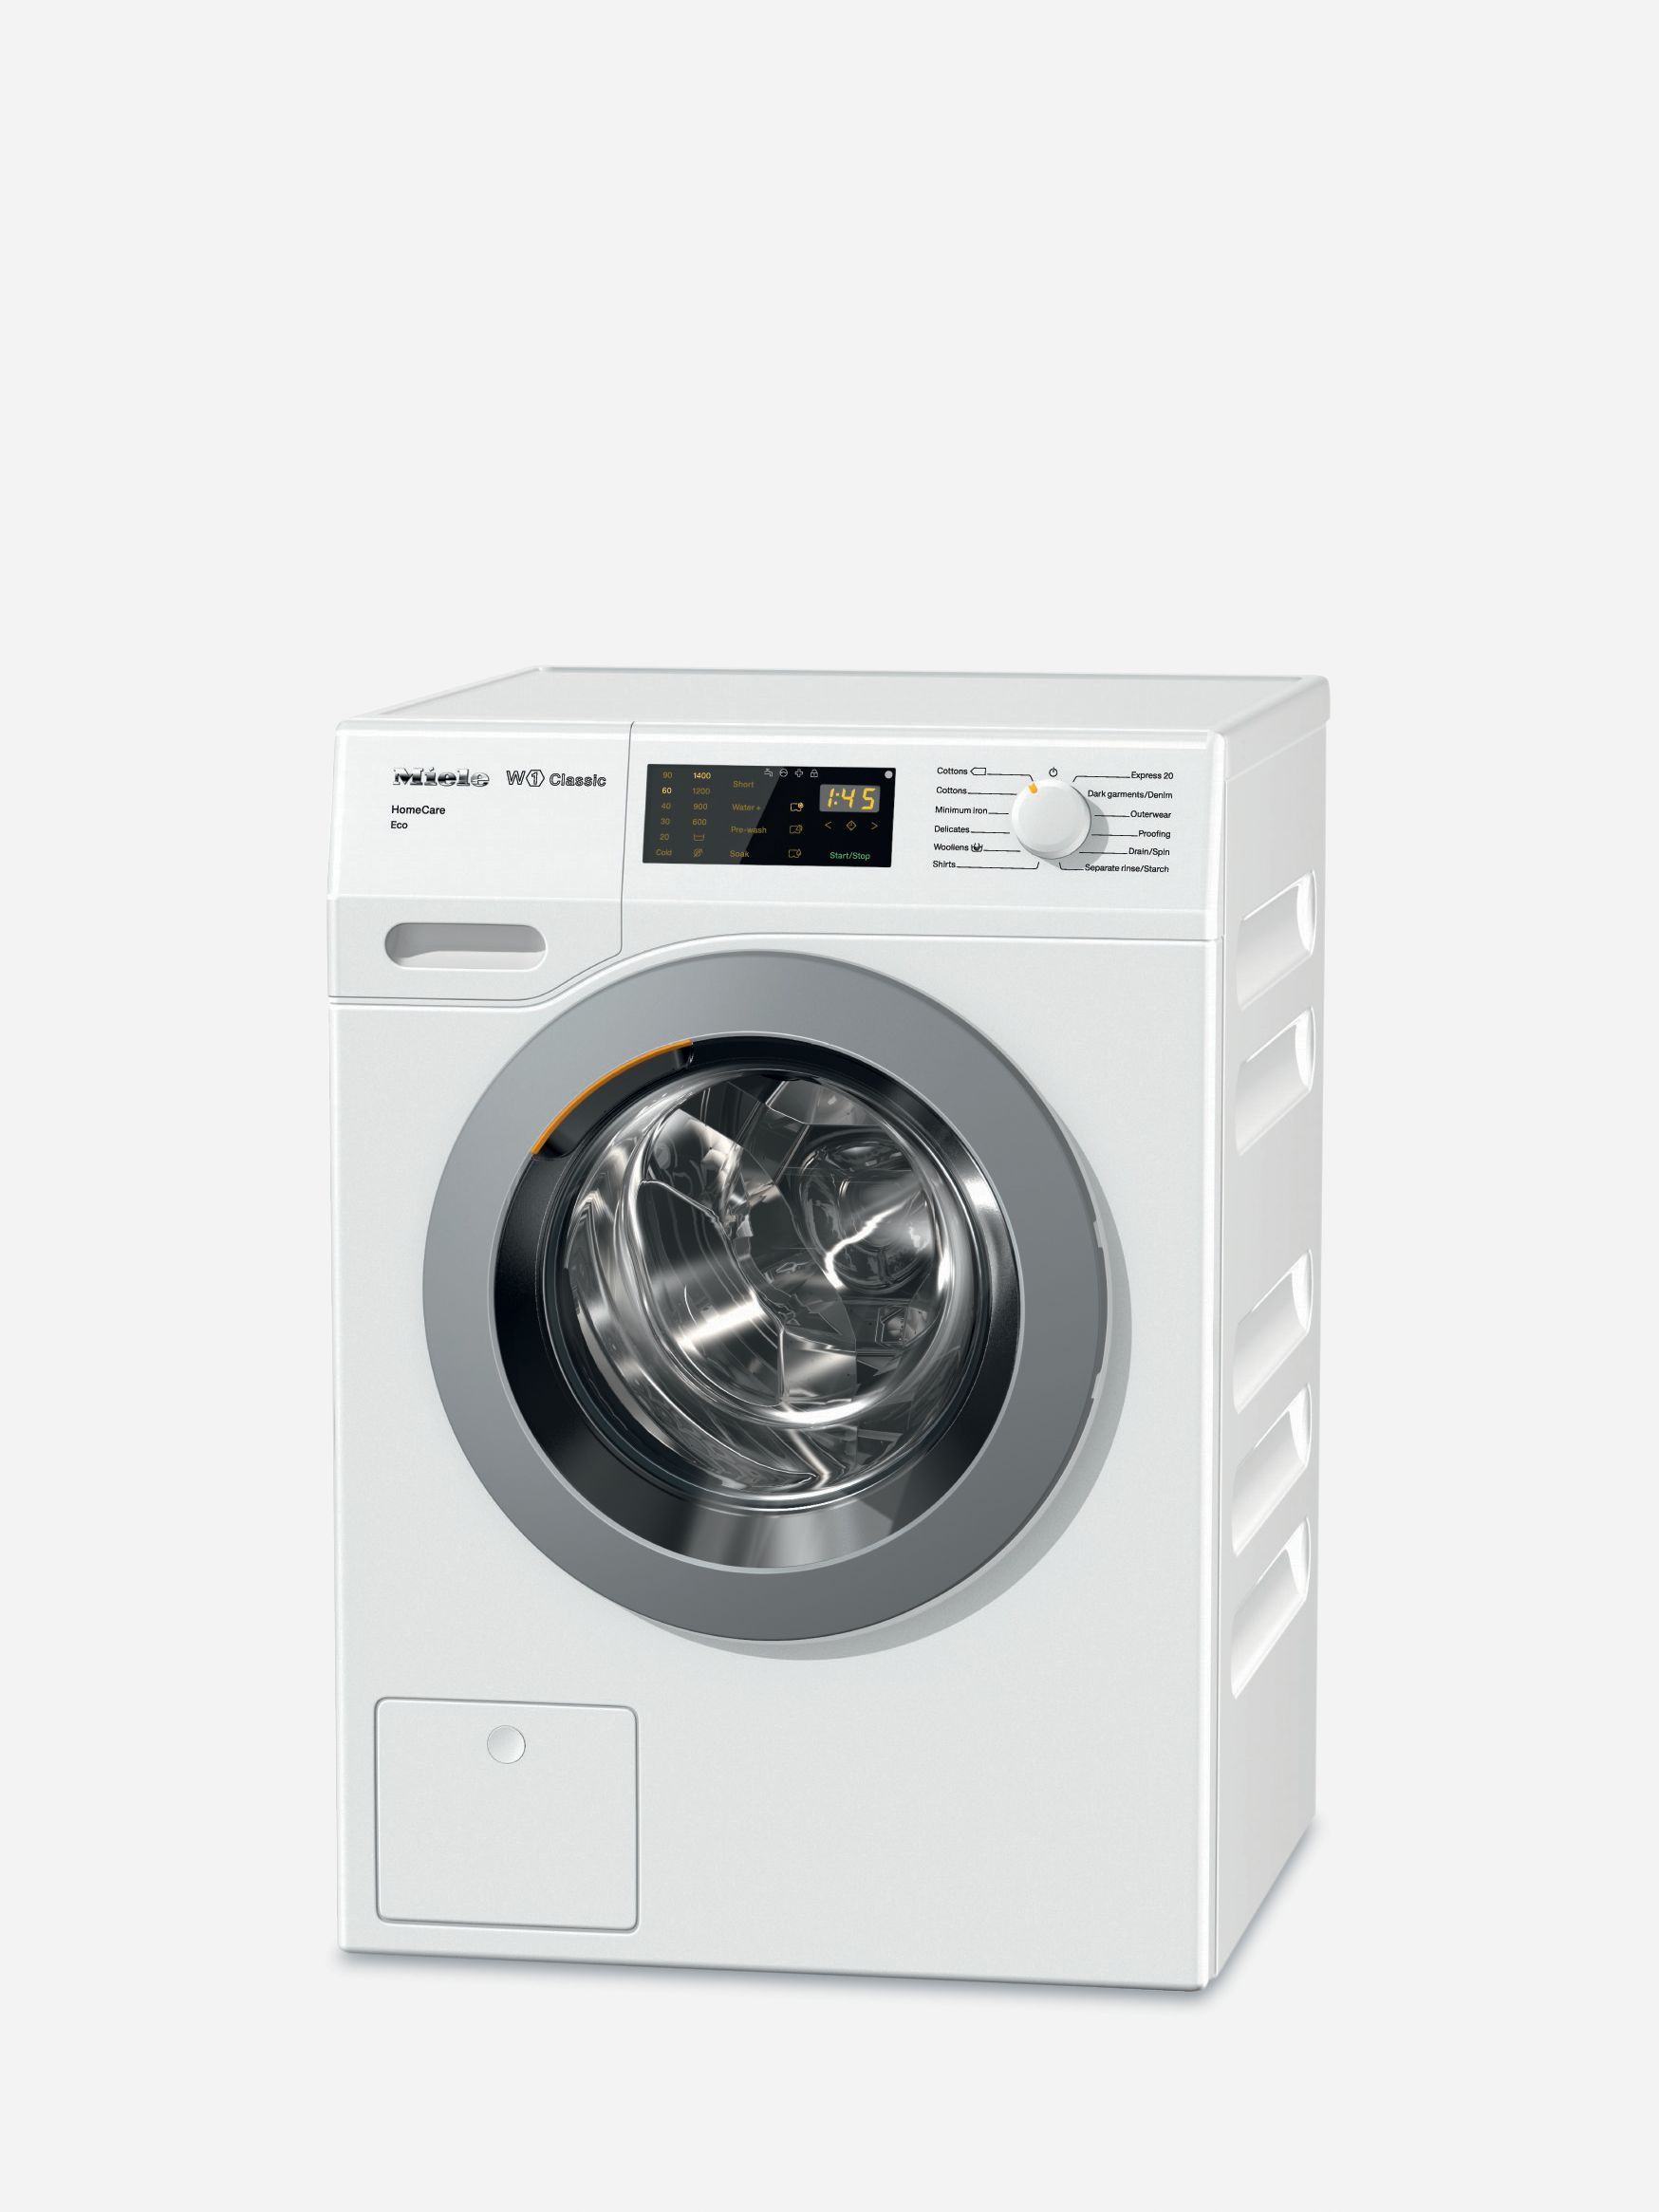 Miele WDB036 HomeCare Freestanding Washing Machine, 7kg Load, A+++ Energy Rating, 1400rpm Spin, White